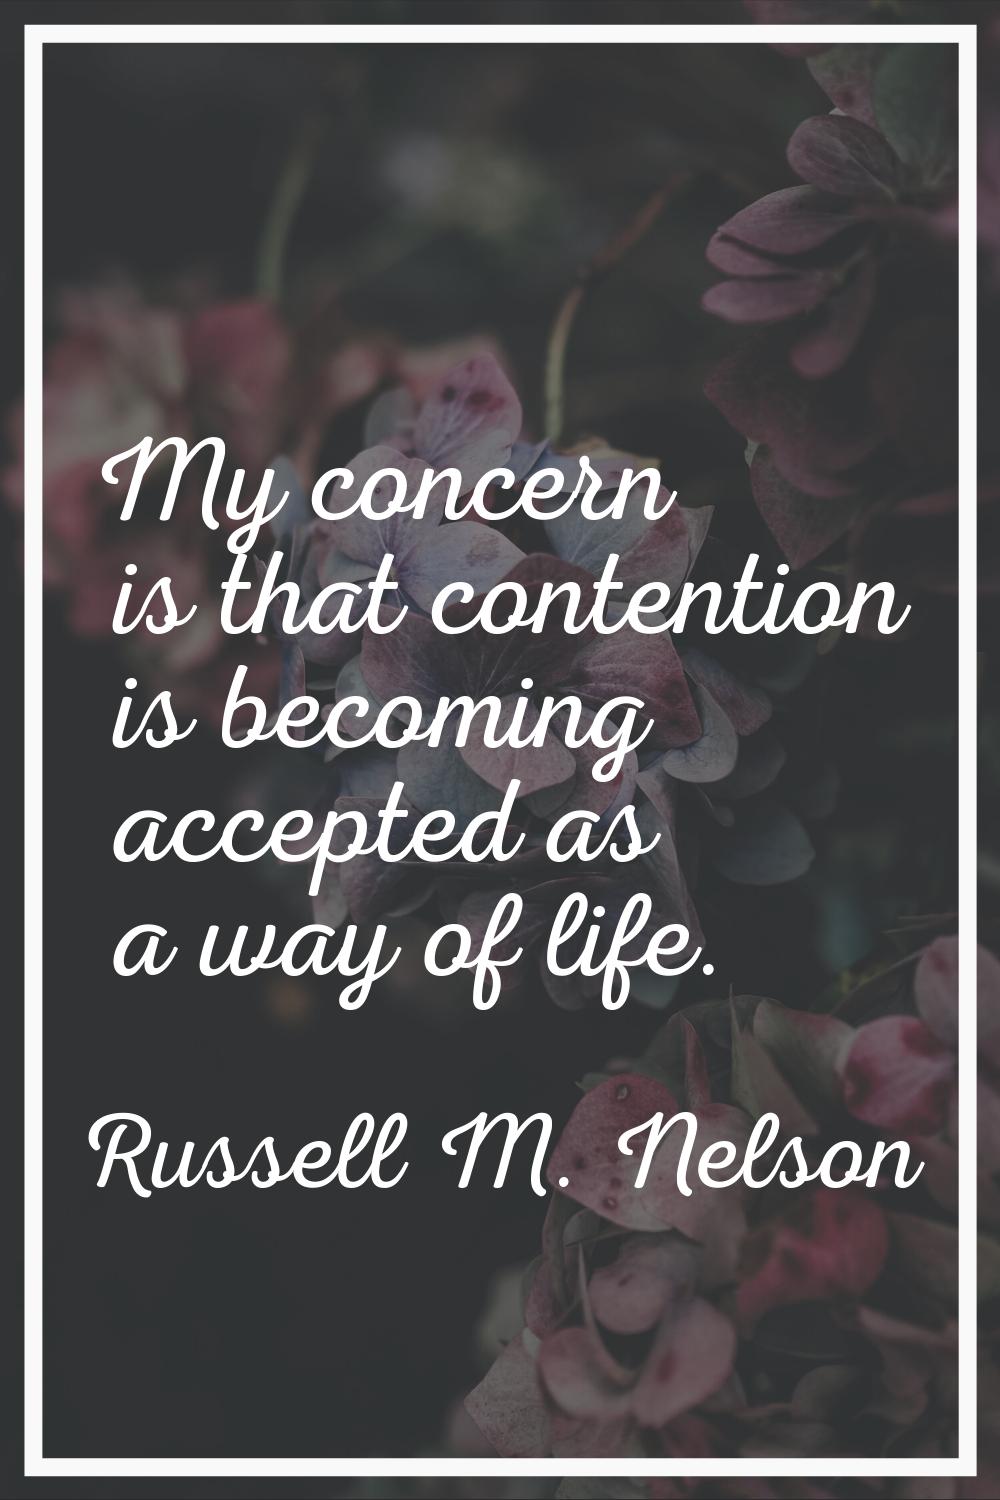 My concern is that contention is becoming accepted as a way of life.